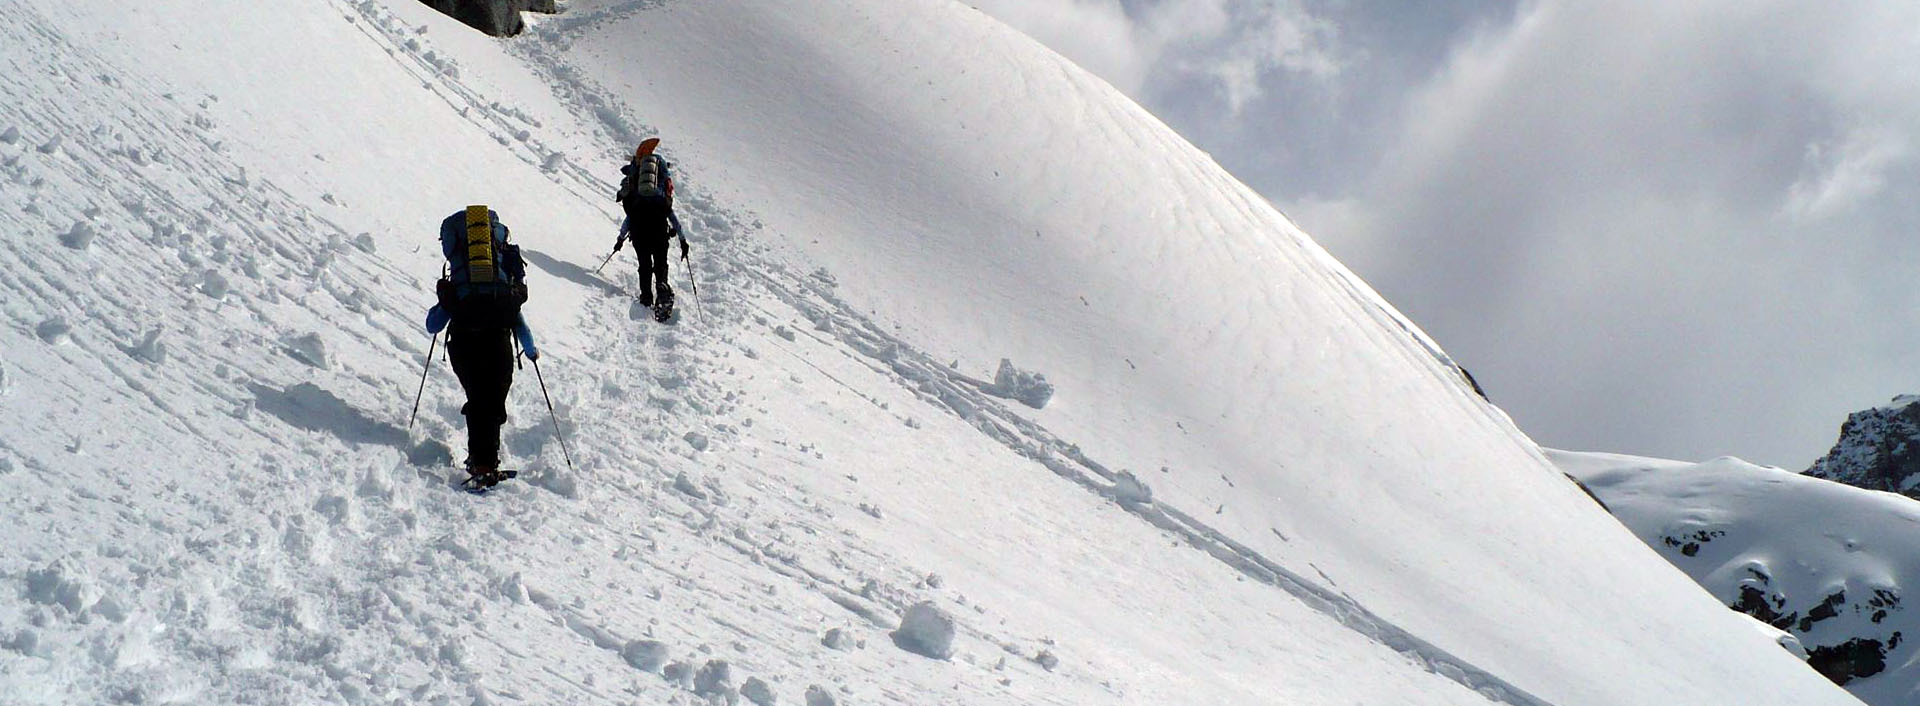 During a snow climbing training, trainees traverses a snowy mountain slope.